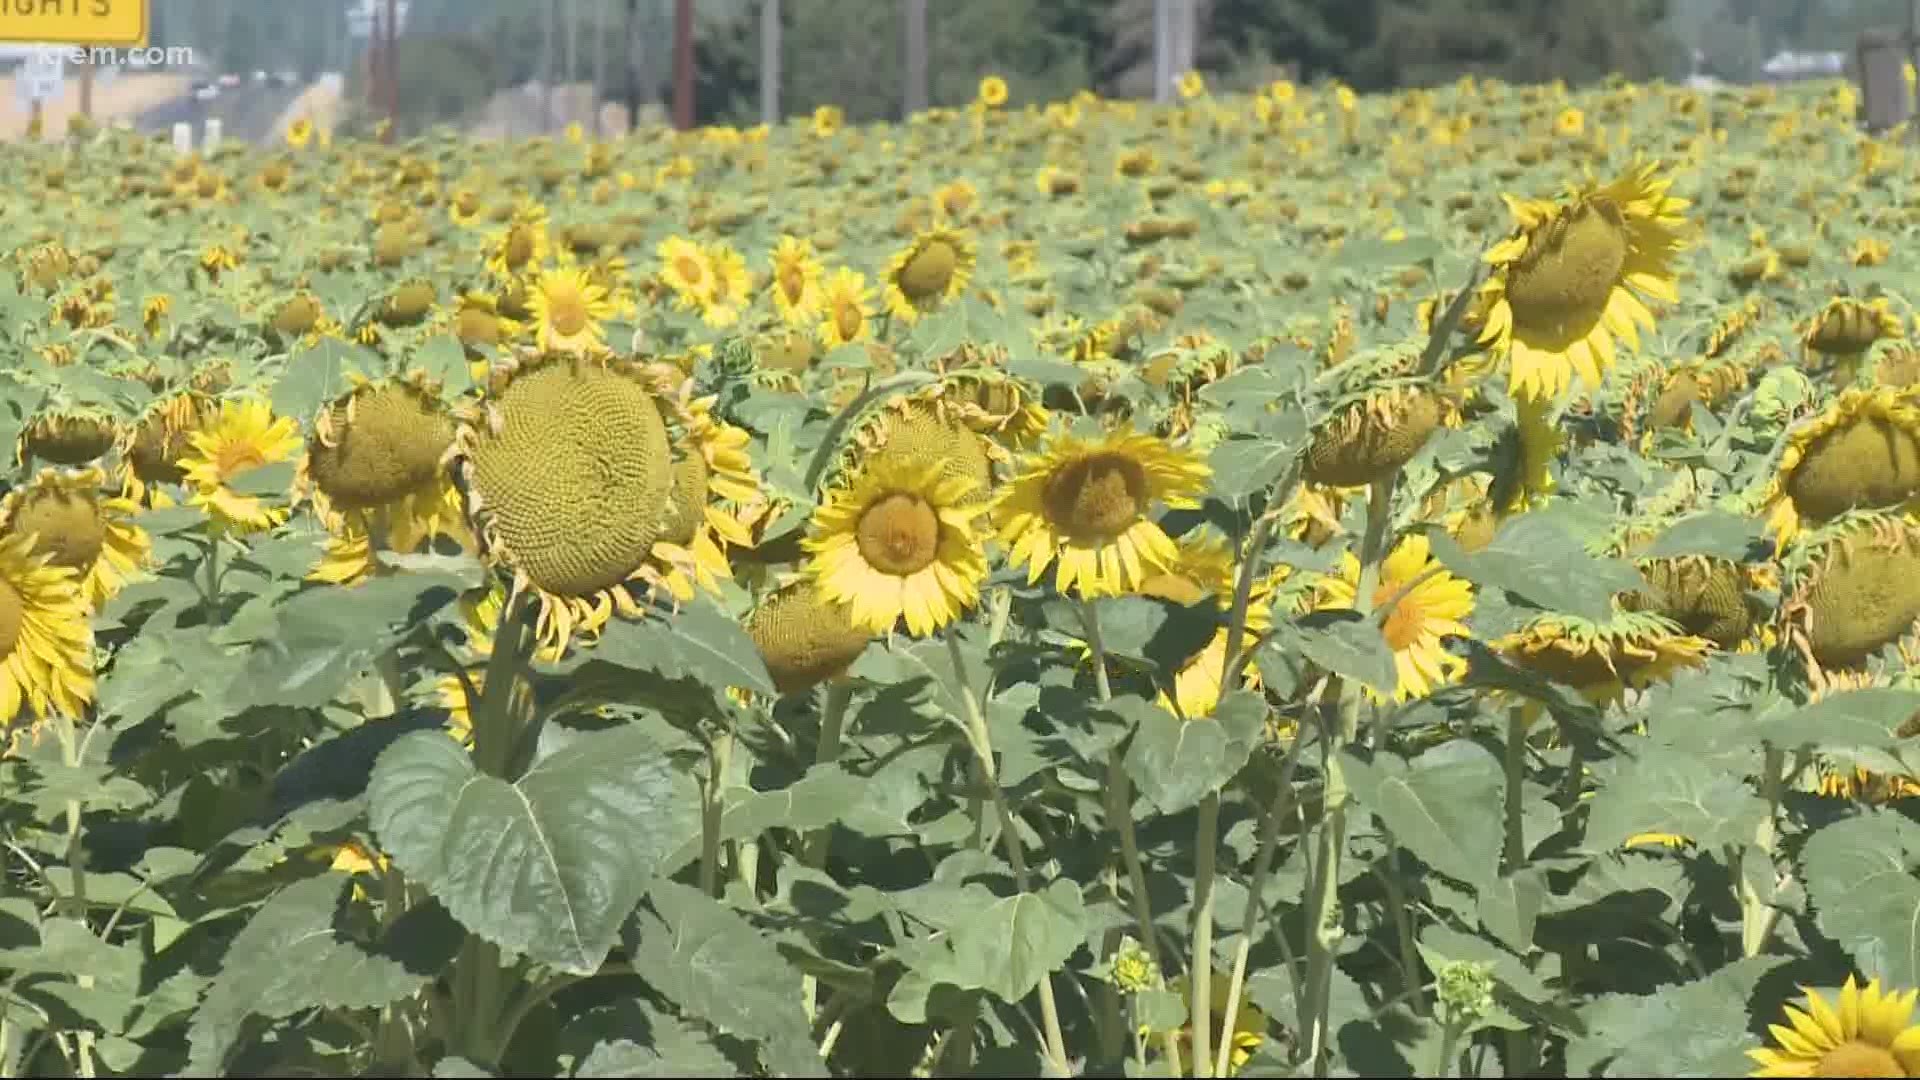 Every year, farmers deal with people ignoring no trespassing signs and destroying sunflowers. Now, some spend hours patrolling their fields.